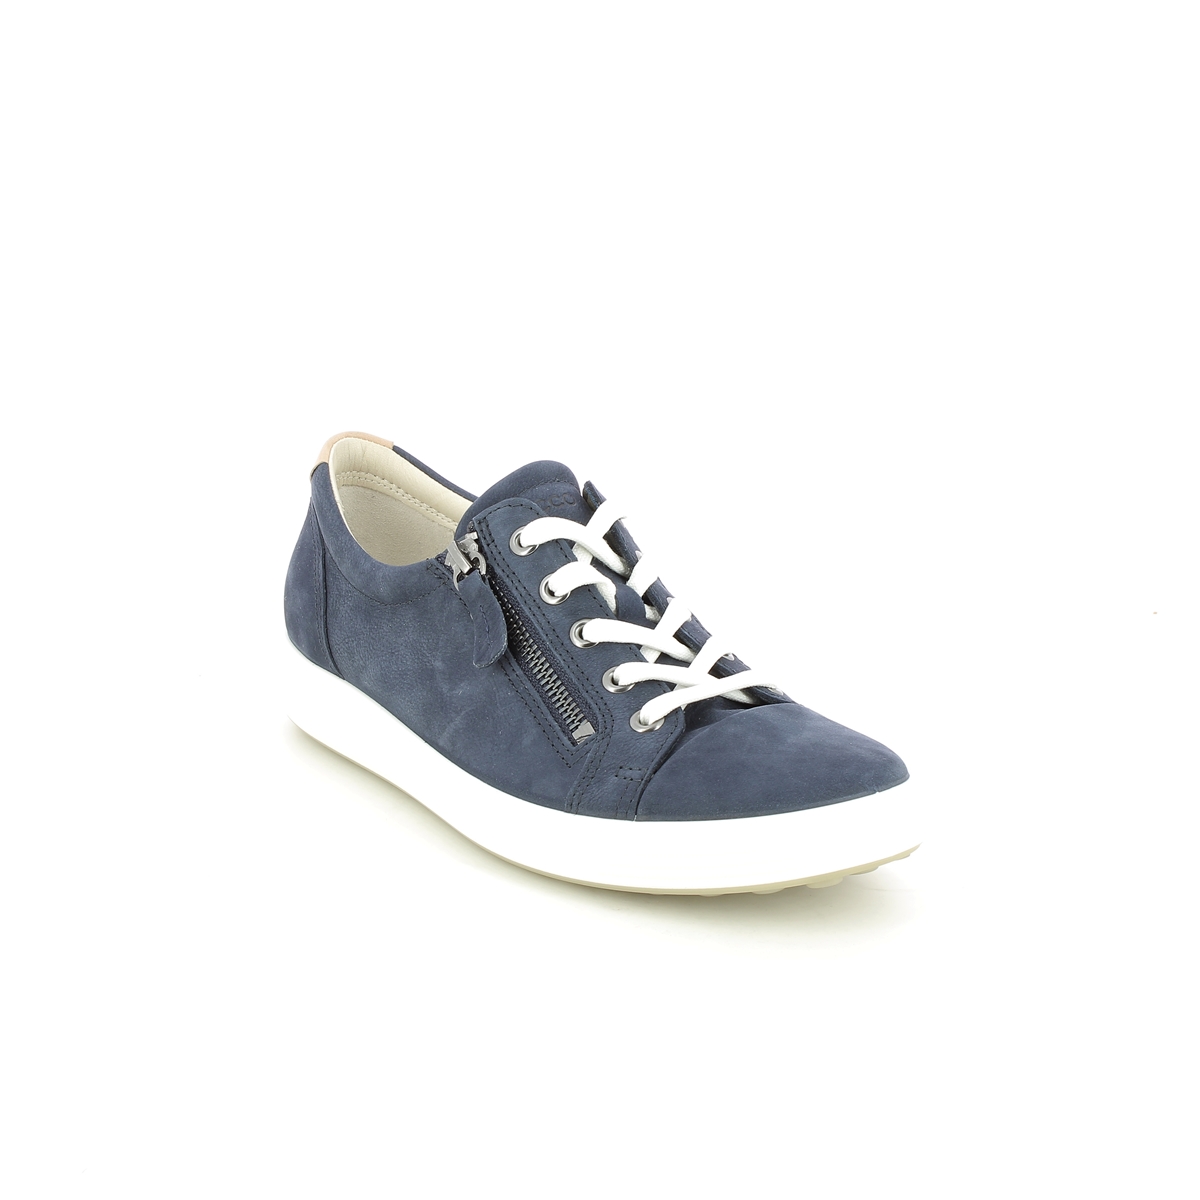 Ecco Soft 7 Lace Zip Navy Nubuck Womens Trainers 430853-02303 In Size 39 In Plain Navy Nubuck